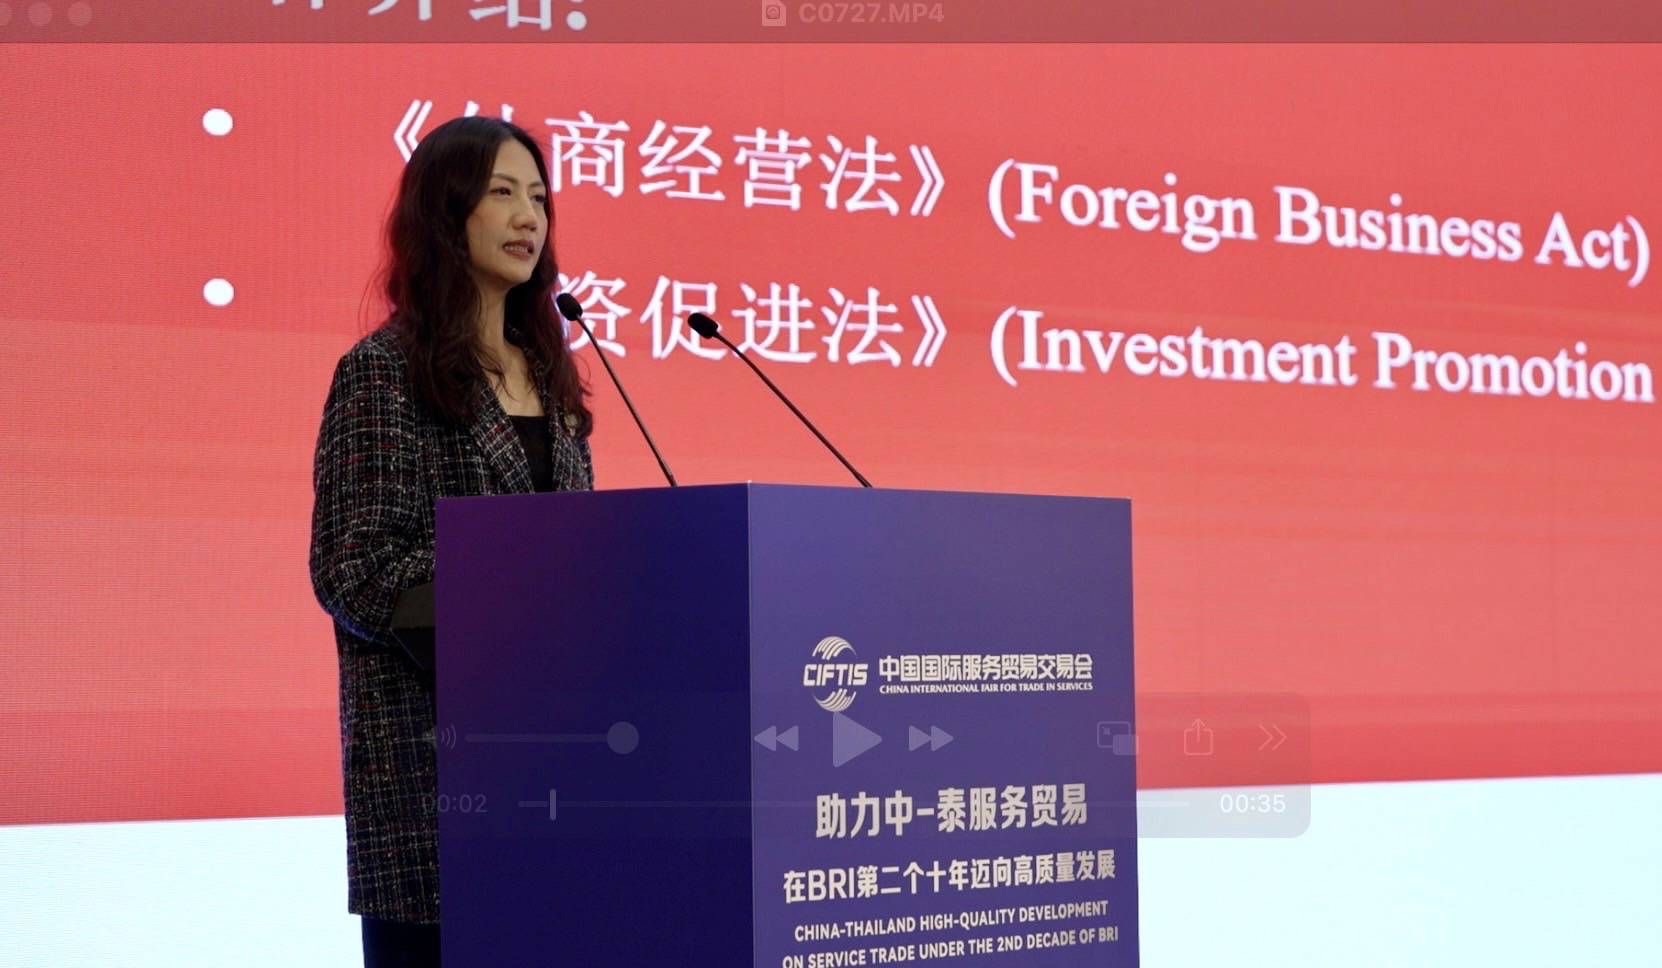 Kudun and Partners Participated at the High-Quality Development on Service Trade Forum, held as part of the 2nd Decade of Belt and Road Initiative (BRI)